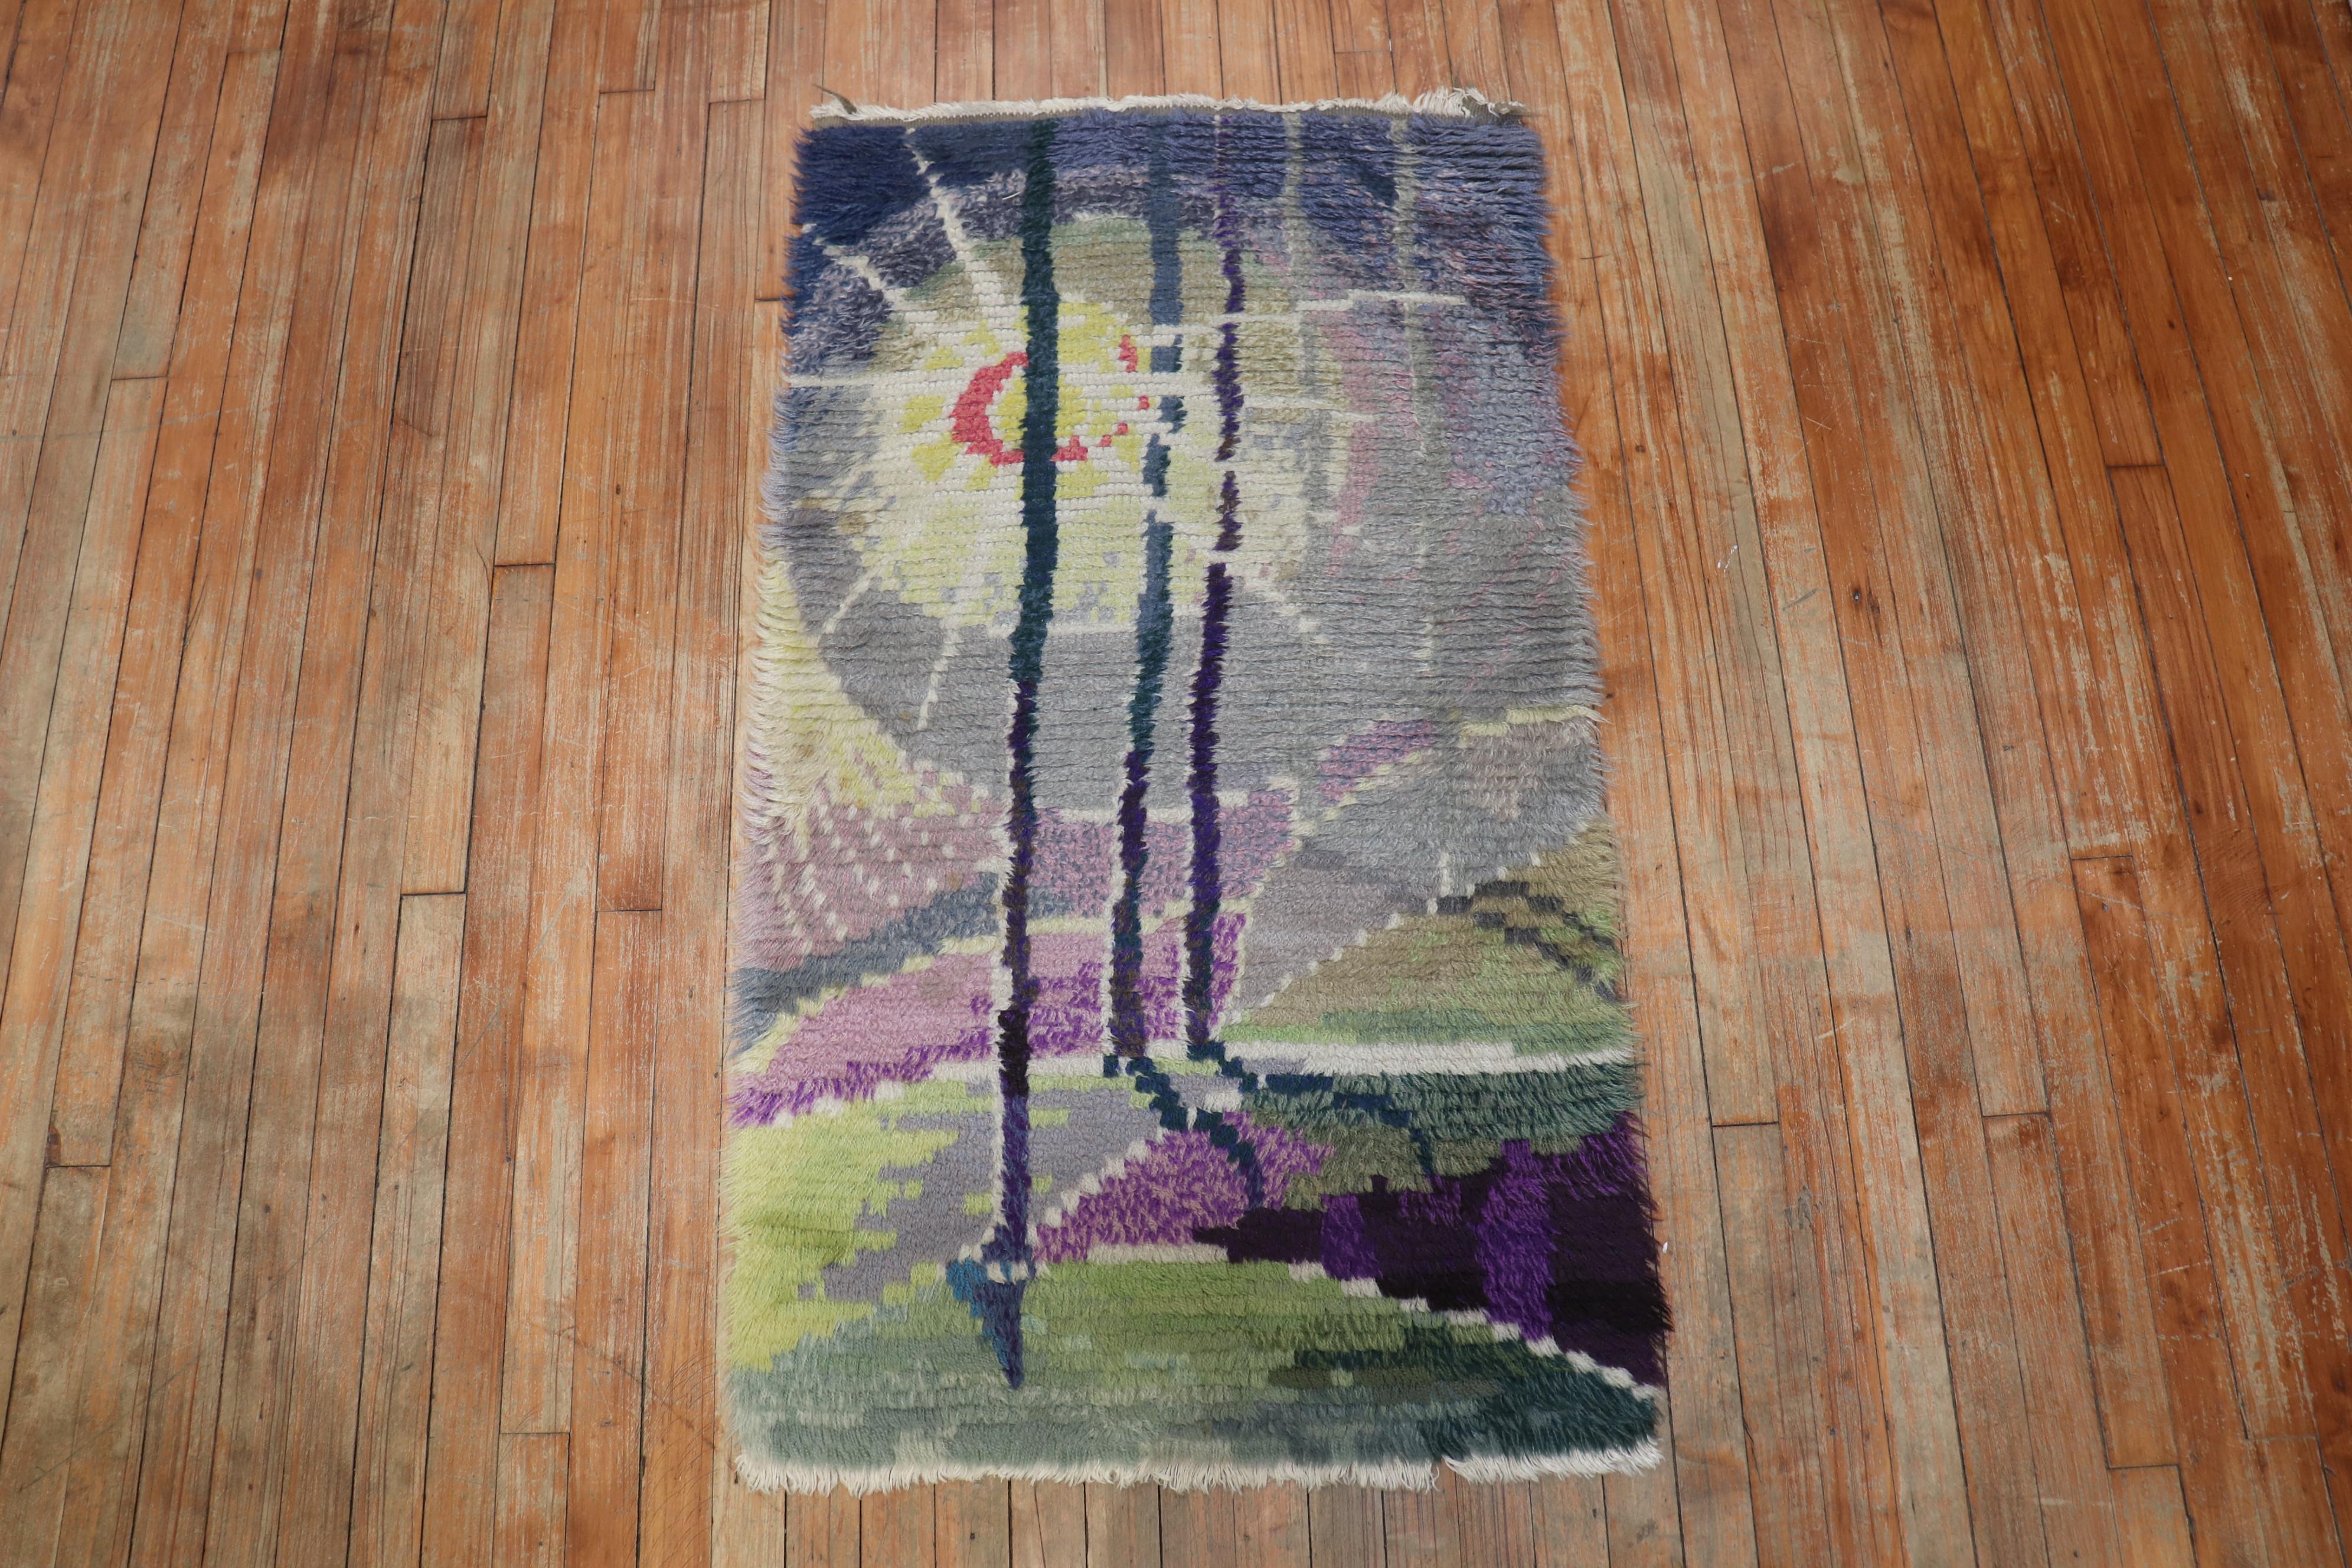 Marvelous small plush Swedish Rya rug from the mid-20th century.

Measures: 2'5” x 4'1”

Swedish Rya rugs are extremely colorful, lovely and quite chic and each have their own character to them. They tend to have thicker shaggy piles which were